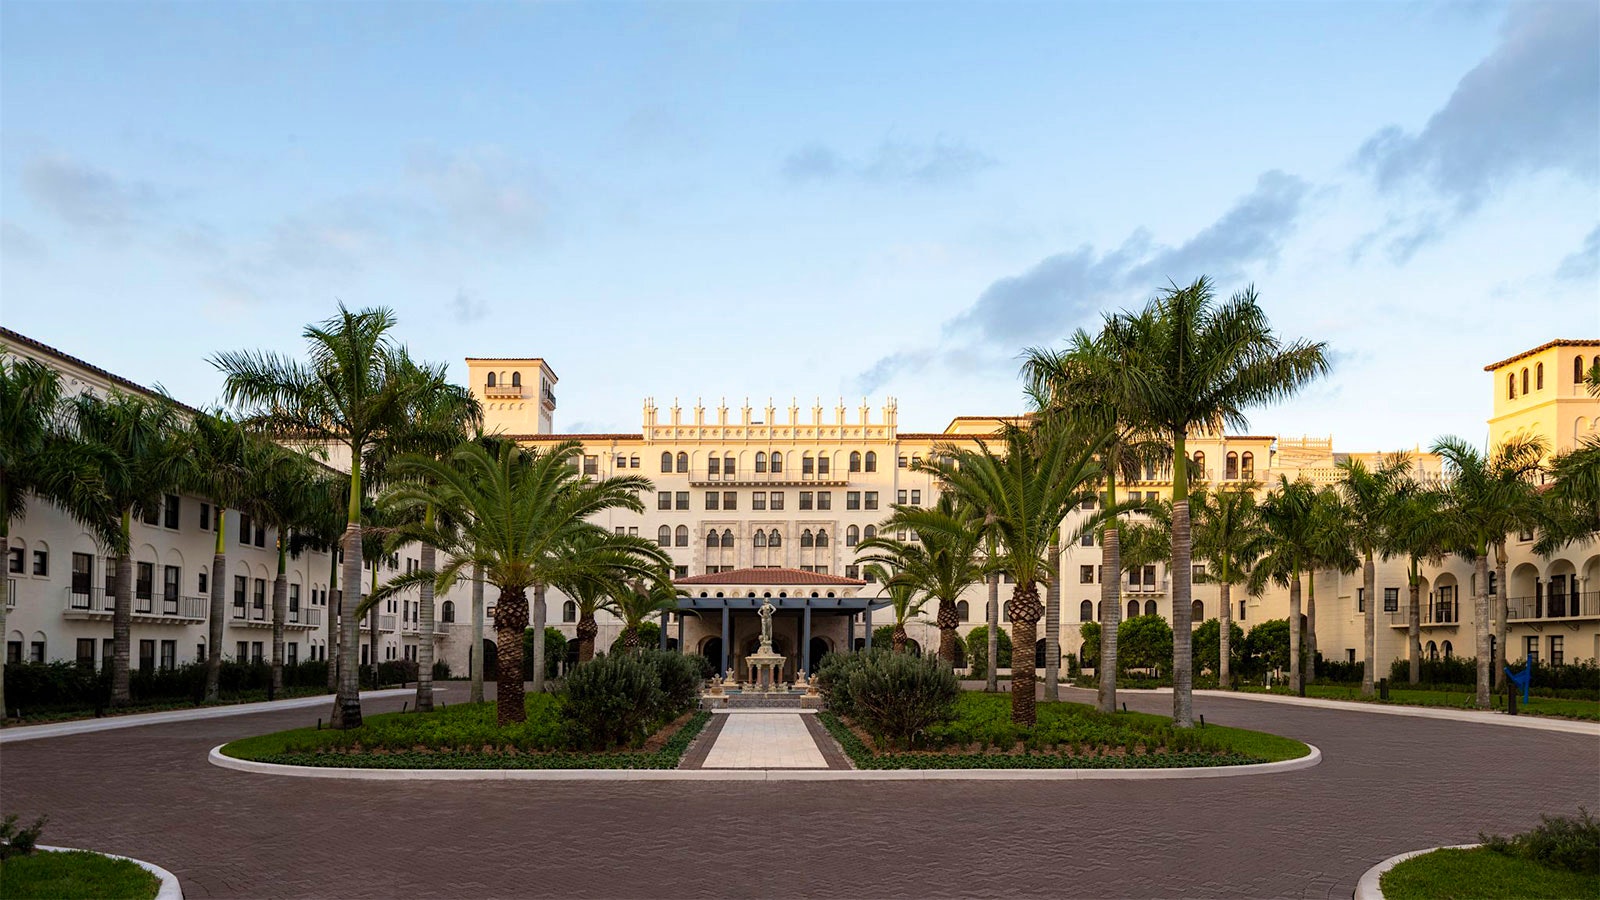  The exterior of the historic Boca Raton resort's iconic building